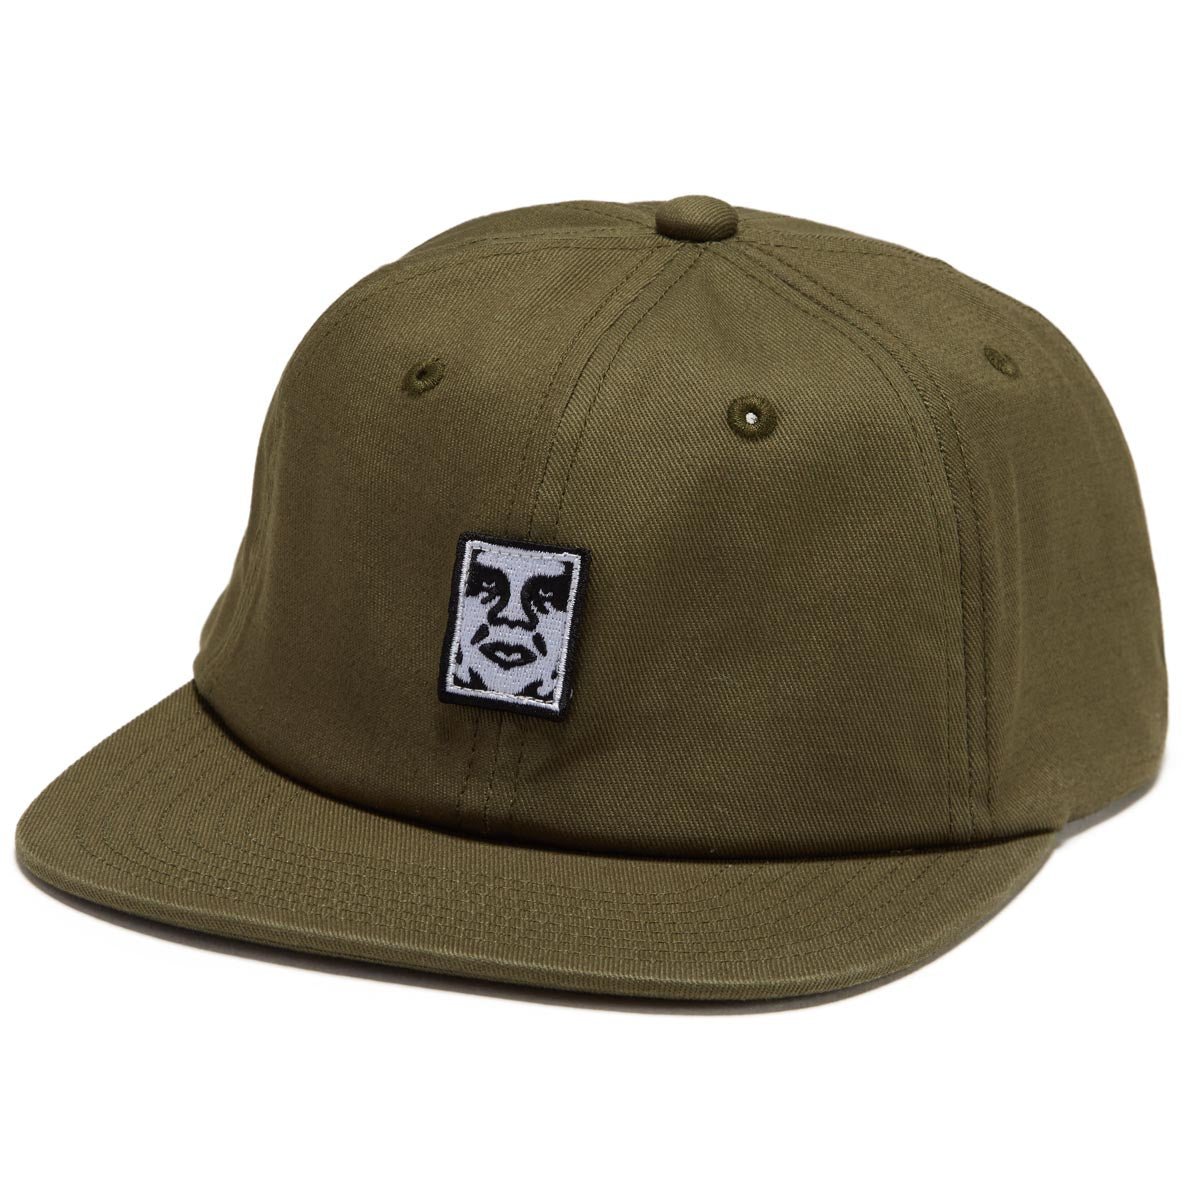 Obey Icon Patch Panel Strapback Hat - Army image 1